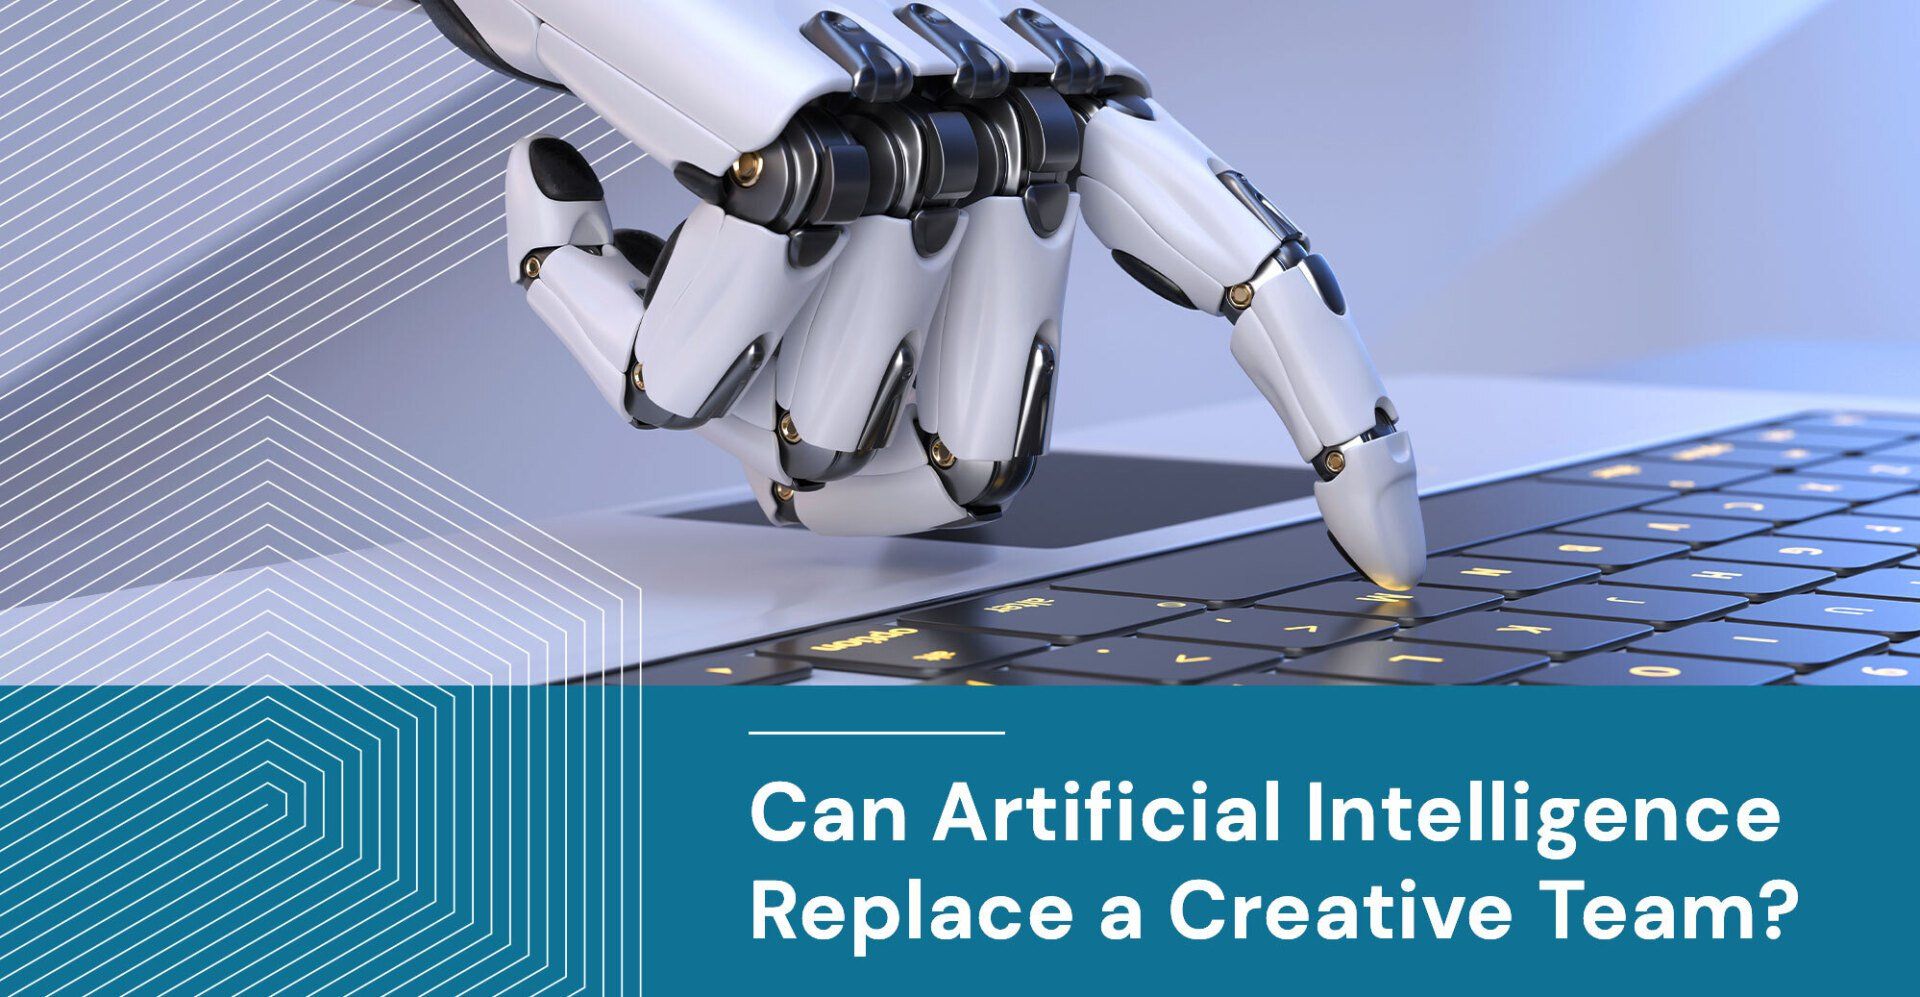 Can Artificial Intelligence Replace a Creative Team?